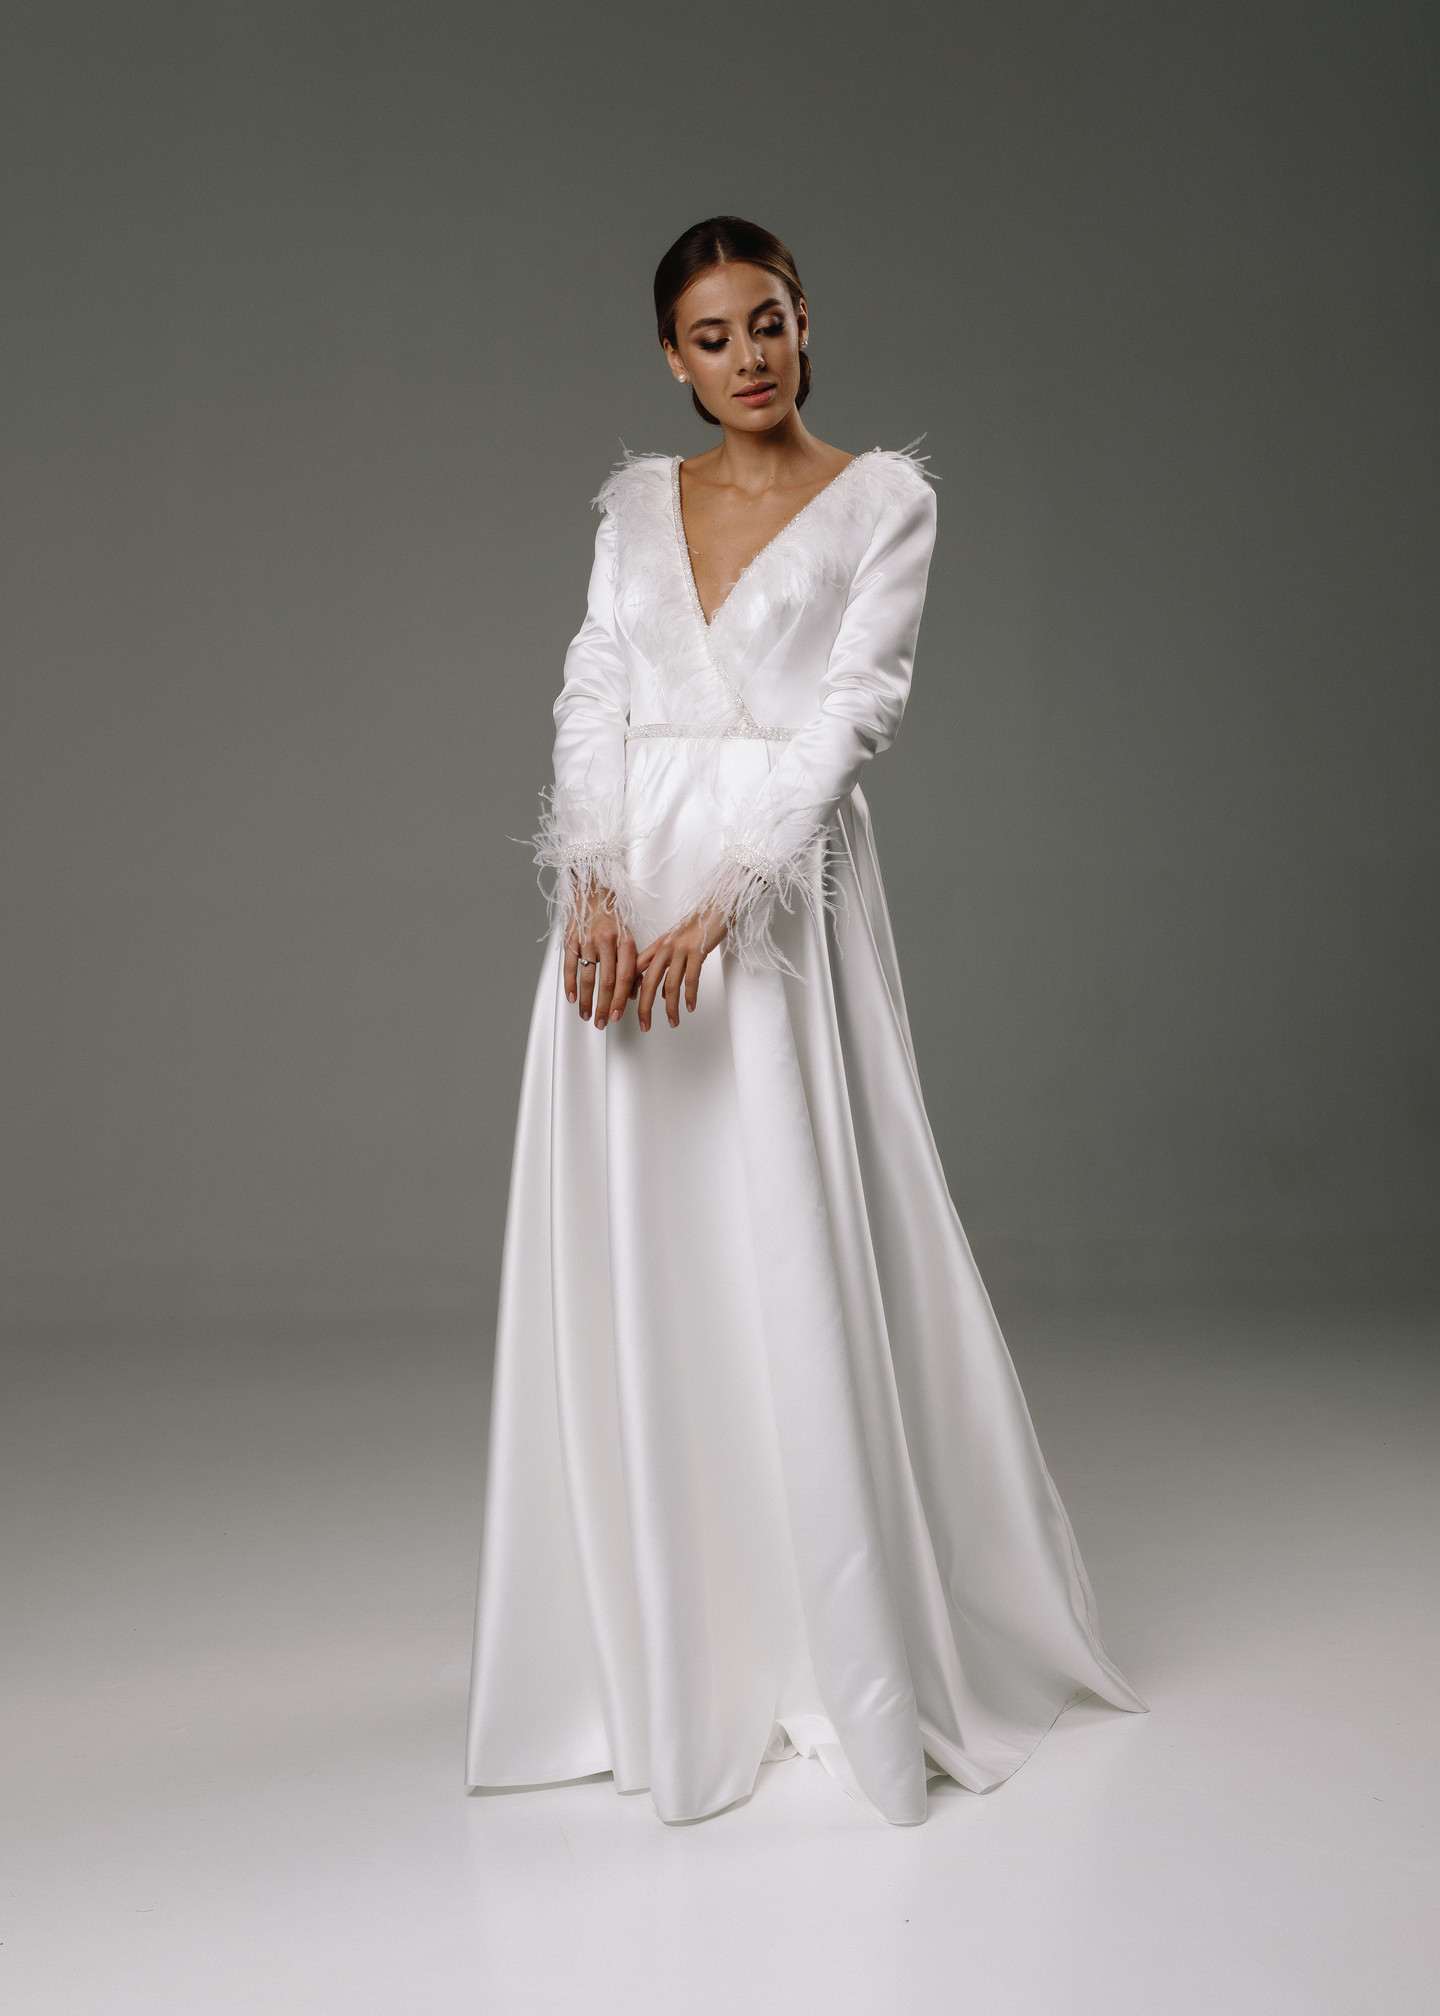 Anisya gown, 2020, couture, dress, bridal, off-white, satin, embroidery, A-line, sleeves, archive